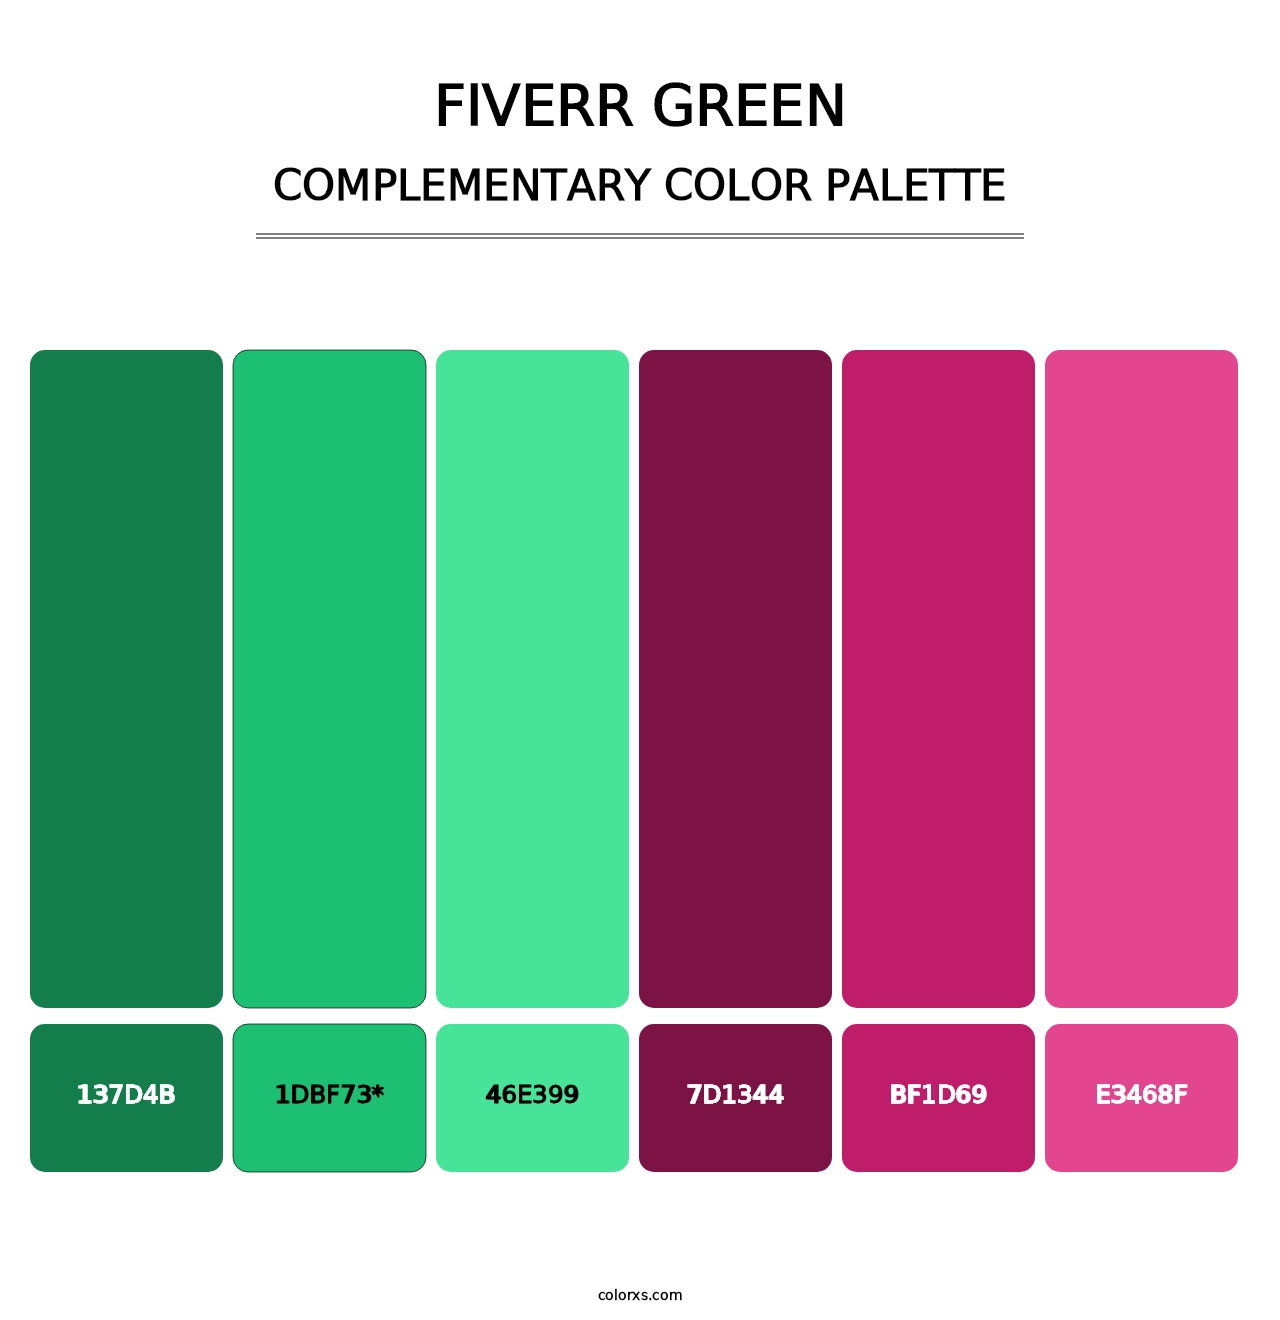 Fiverr Green - Complementary Color Palette